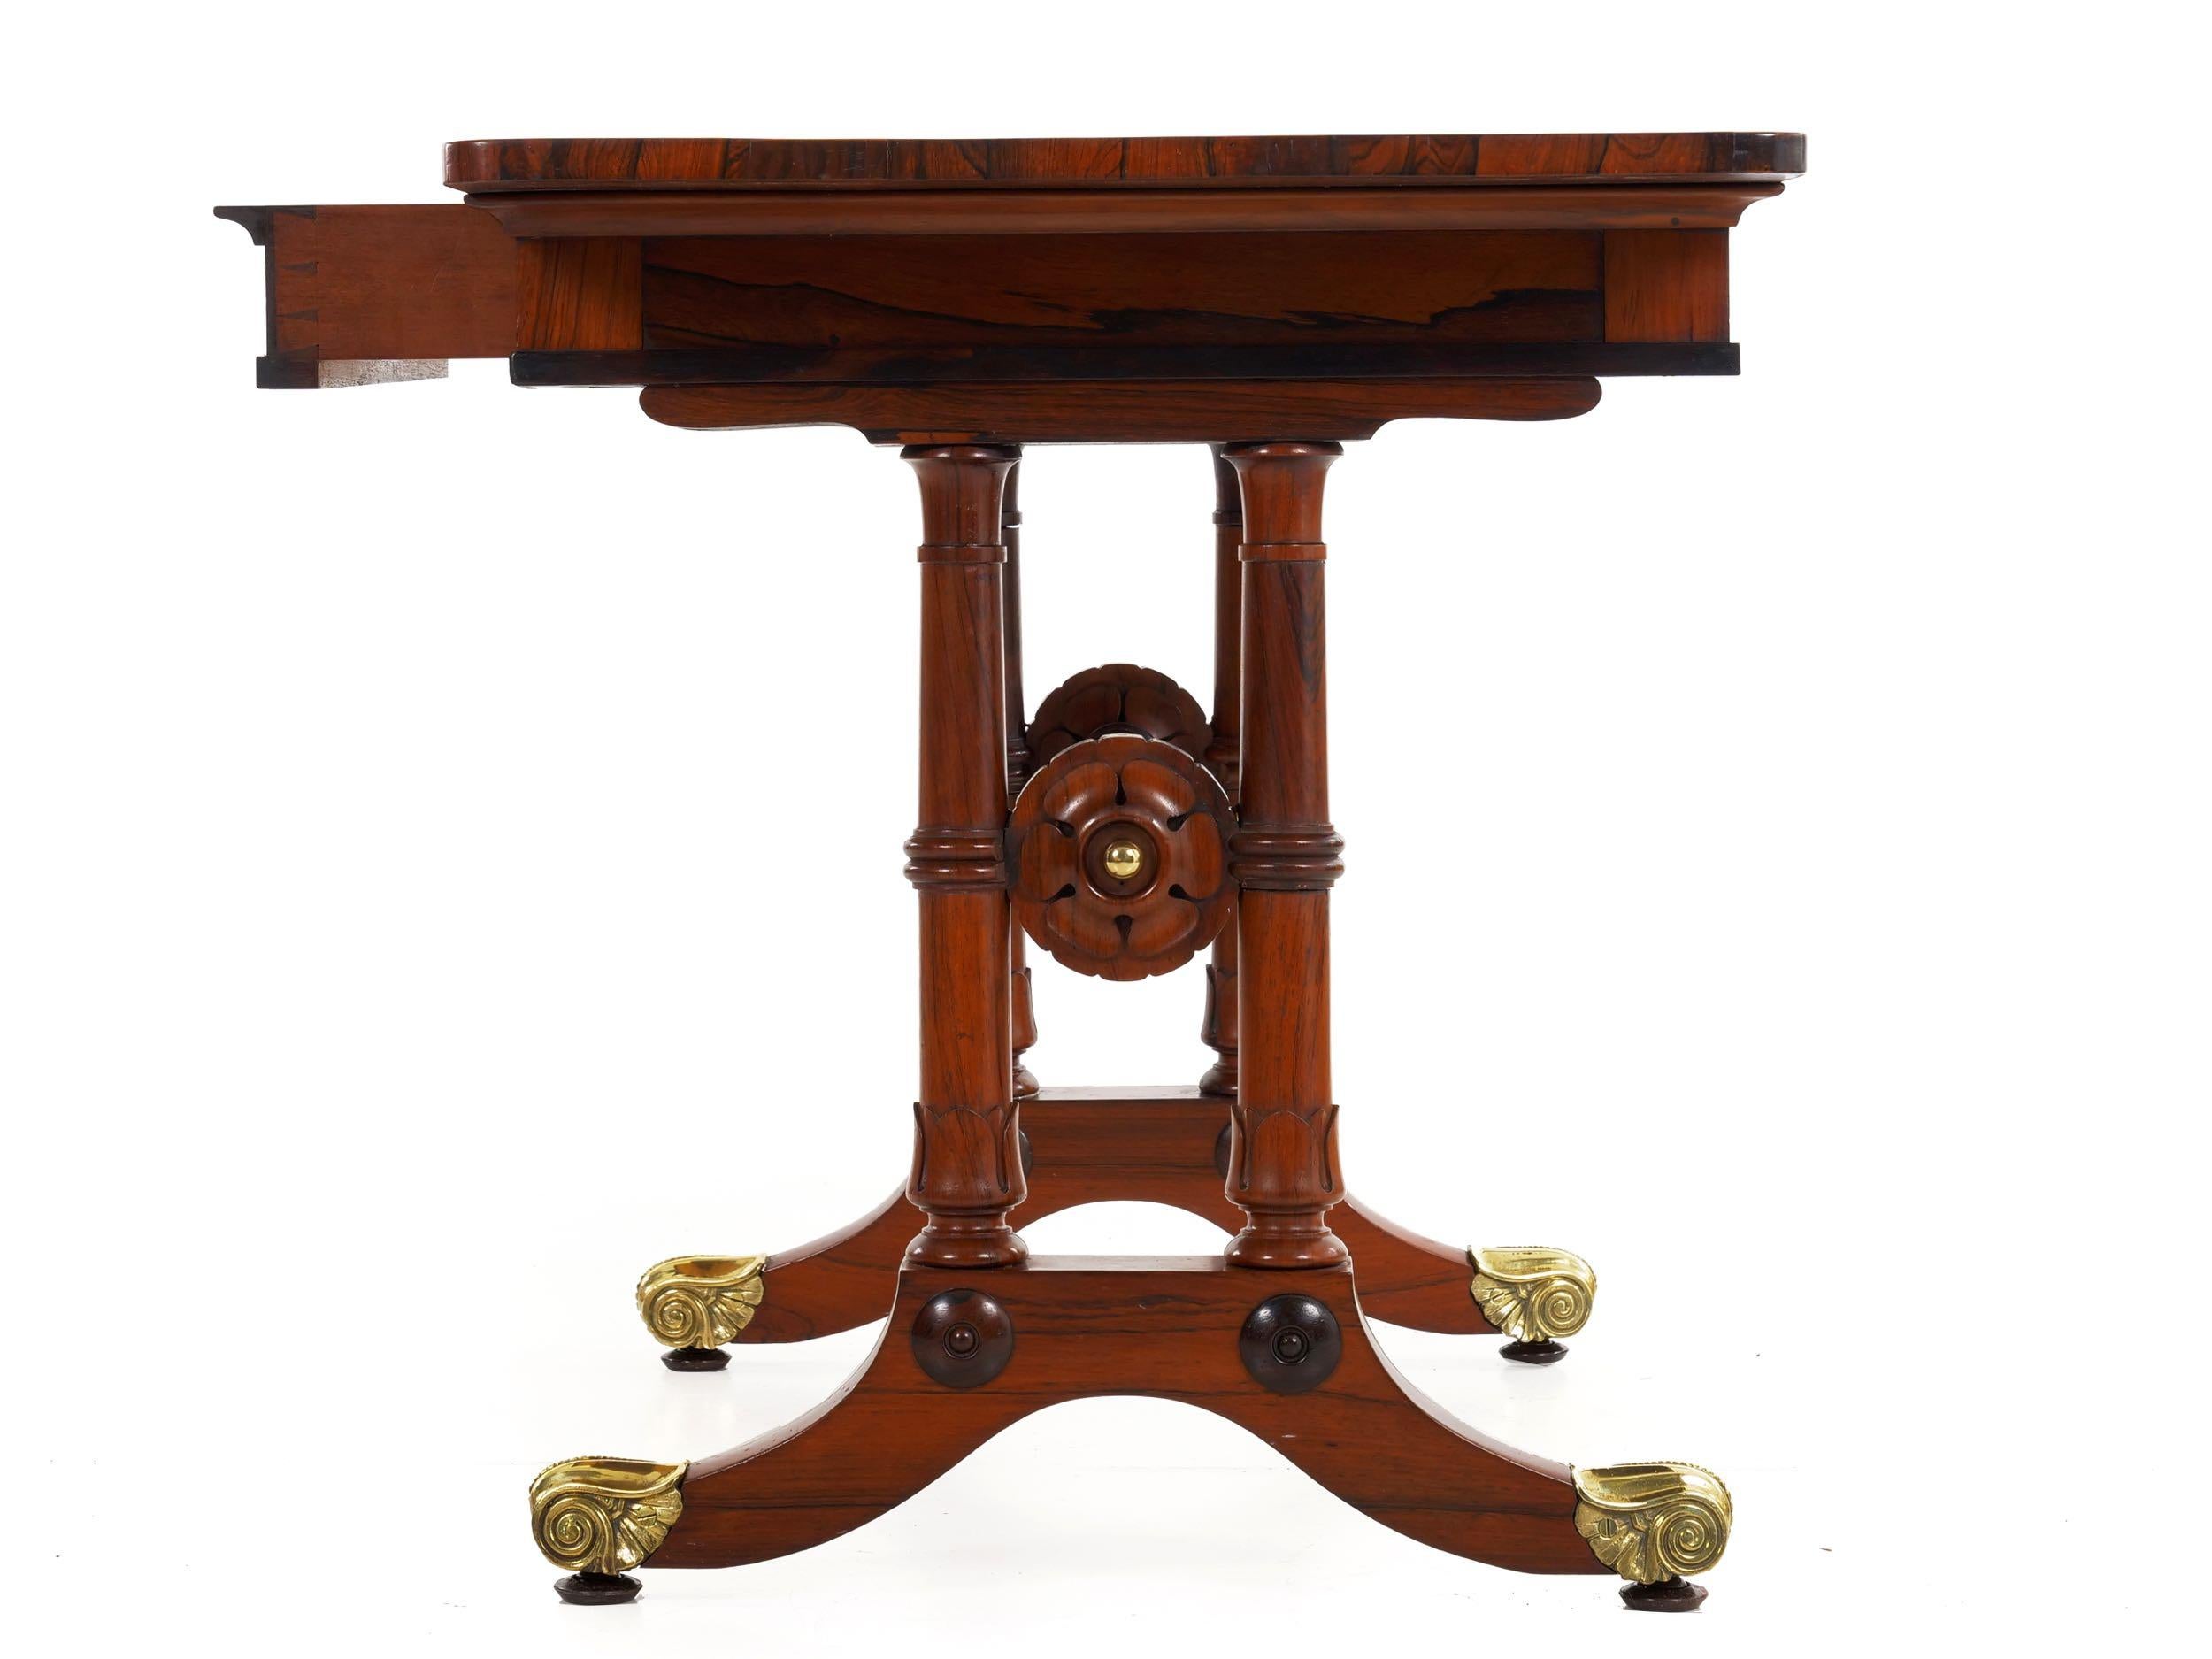 William IV English Antique Regency Rosewood Leather-Top Writing Accent Table, circa 1835